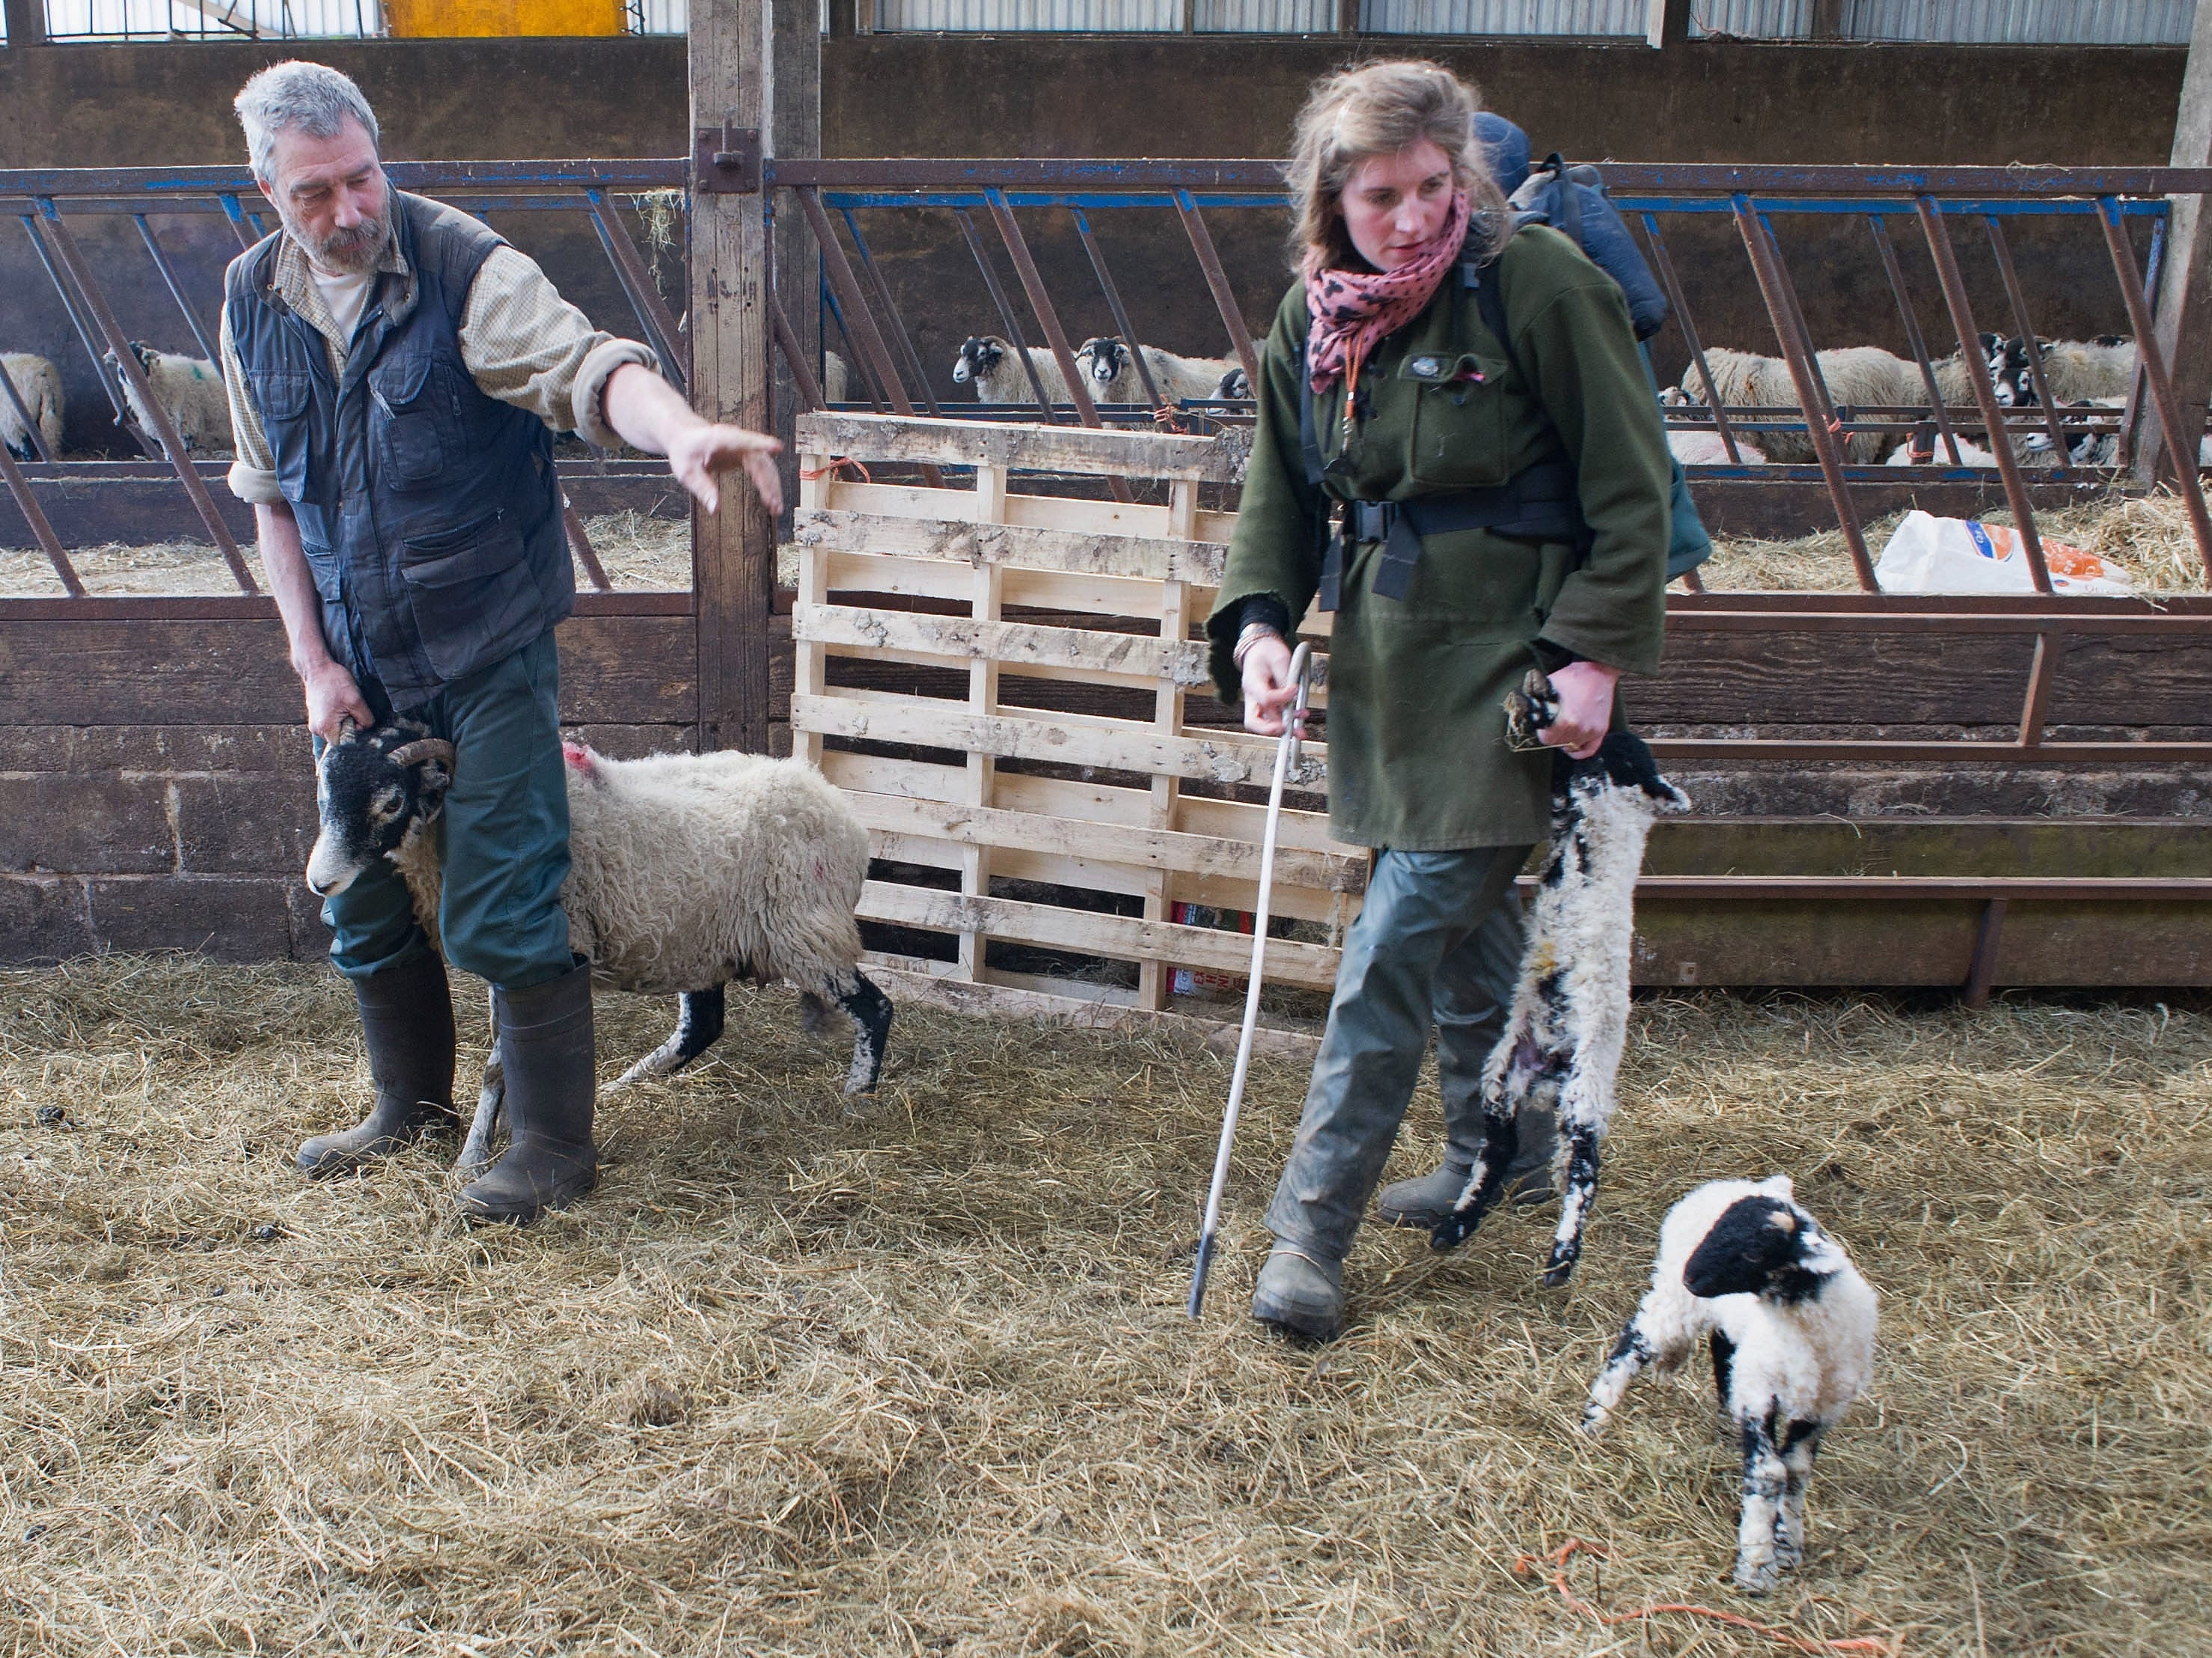 Amanda Owen and husband Clive, who have nine children, rose to fame through the Channel 5 show which follows their life on Ravenseat Farm